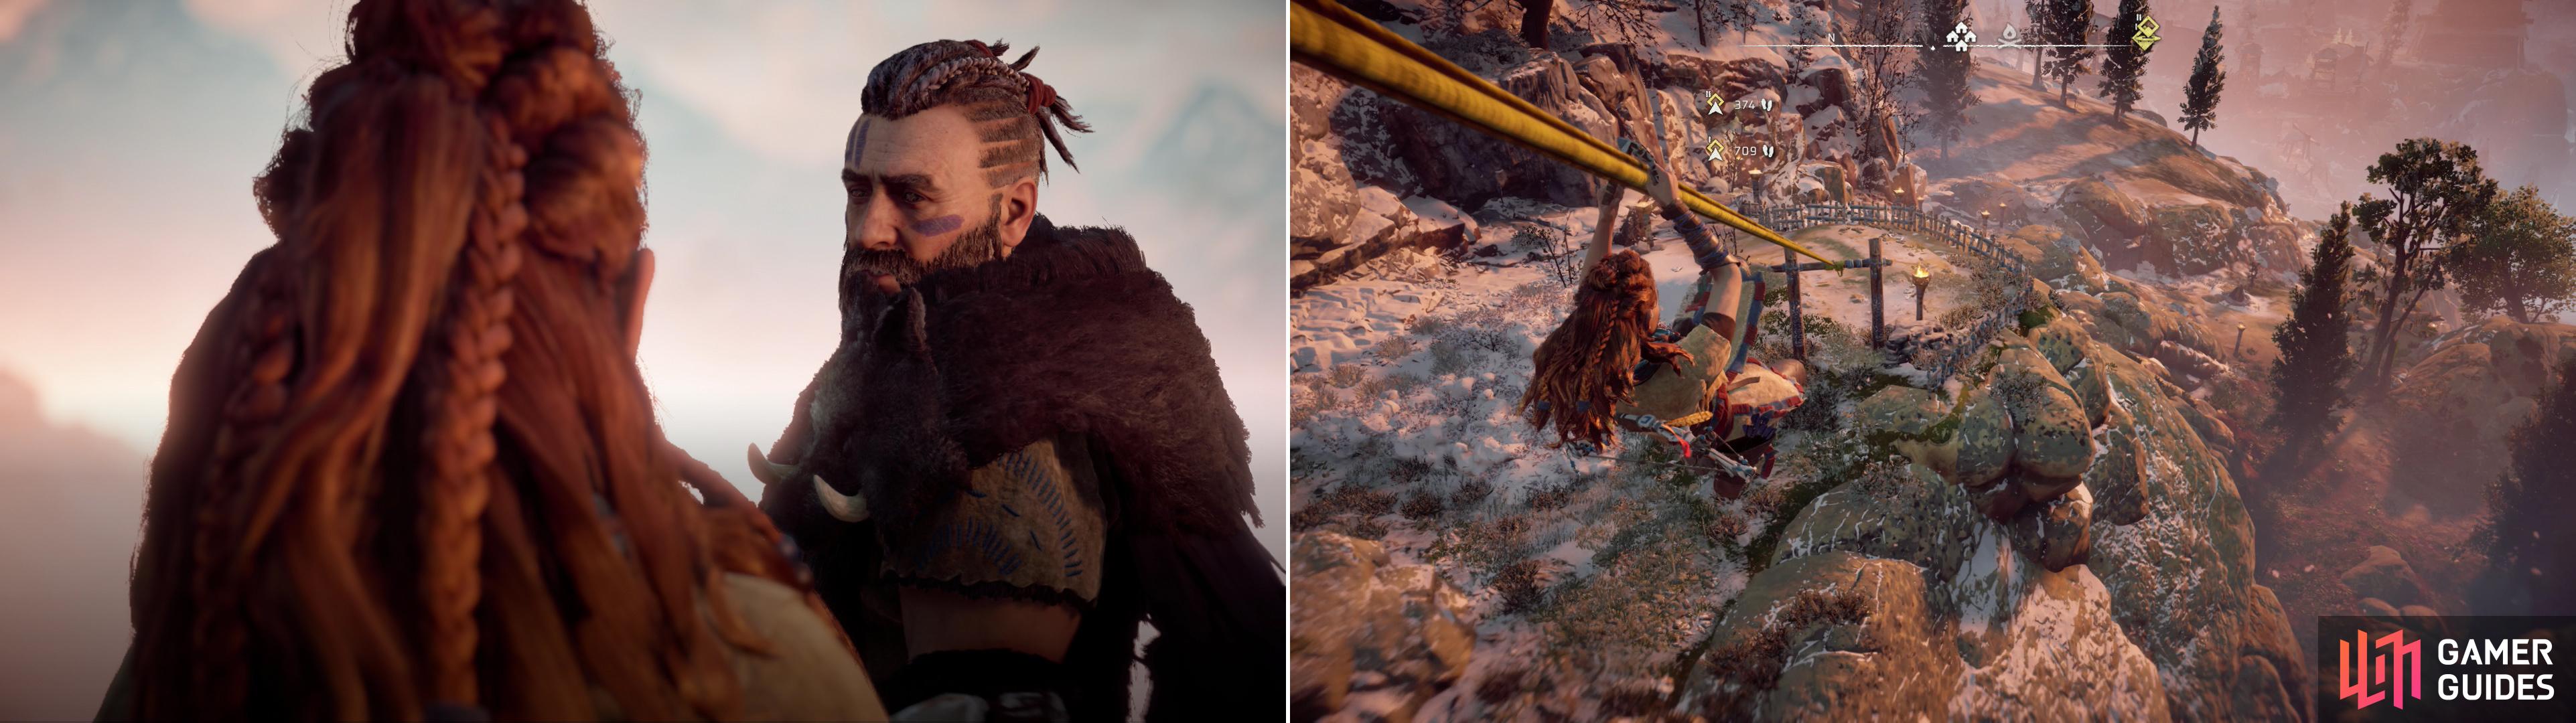 Talk to Rost, who will tell you about a mysterious hunt you need to prepare for (left). Once Aloy and Rost have set up some objectives, use the nearby zipline to reach the valley (right).